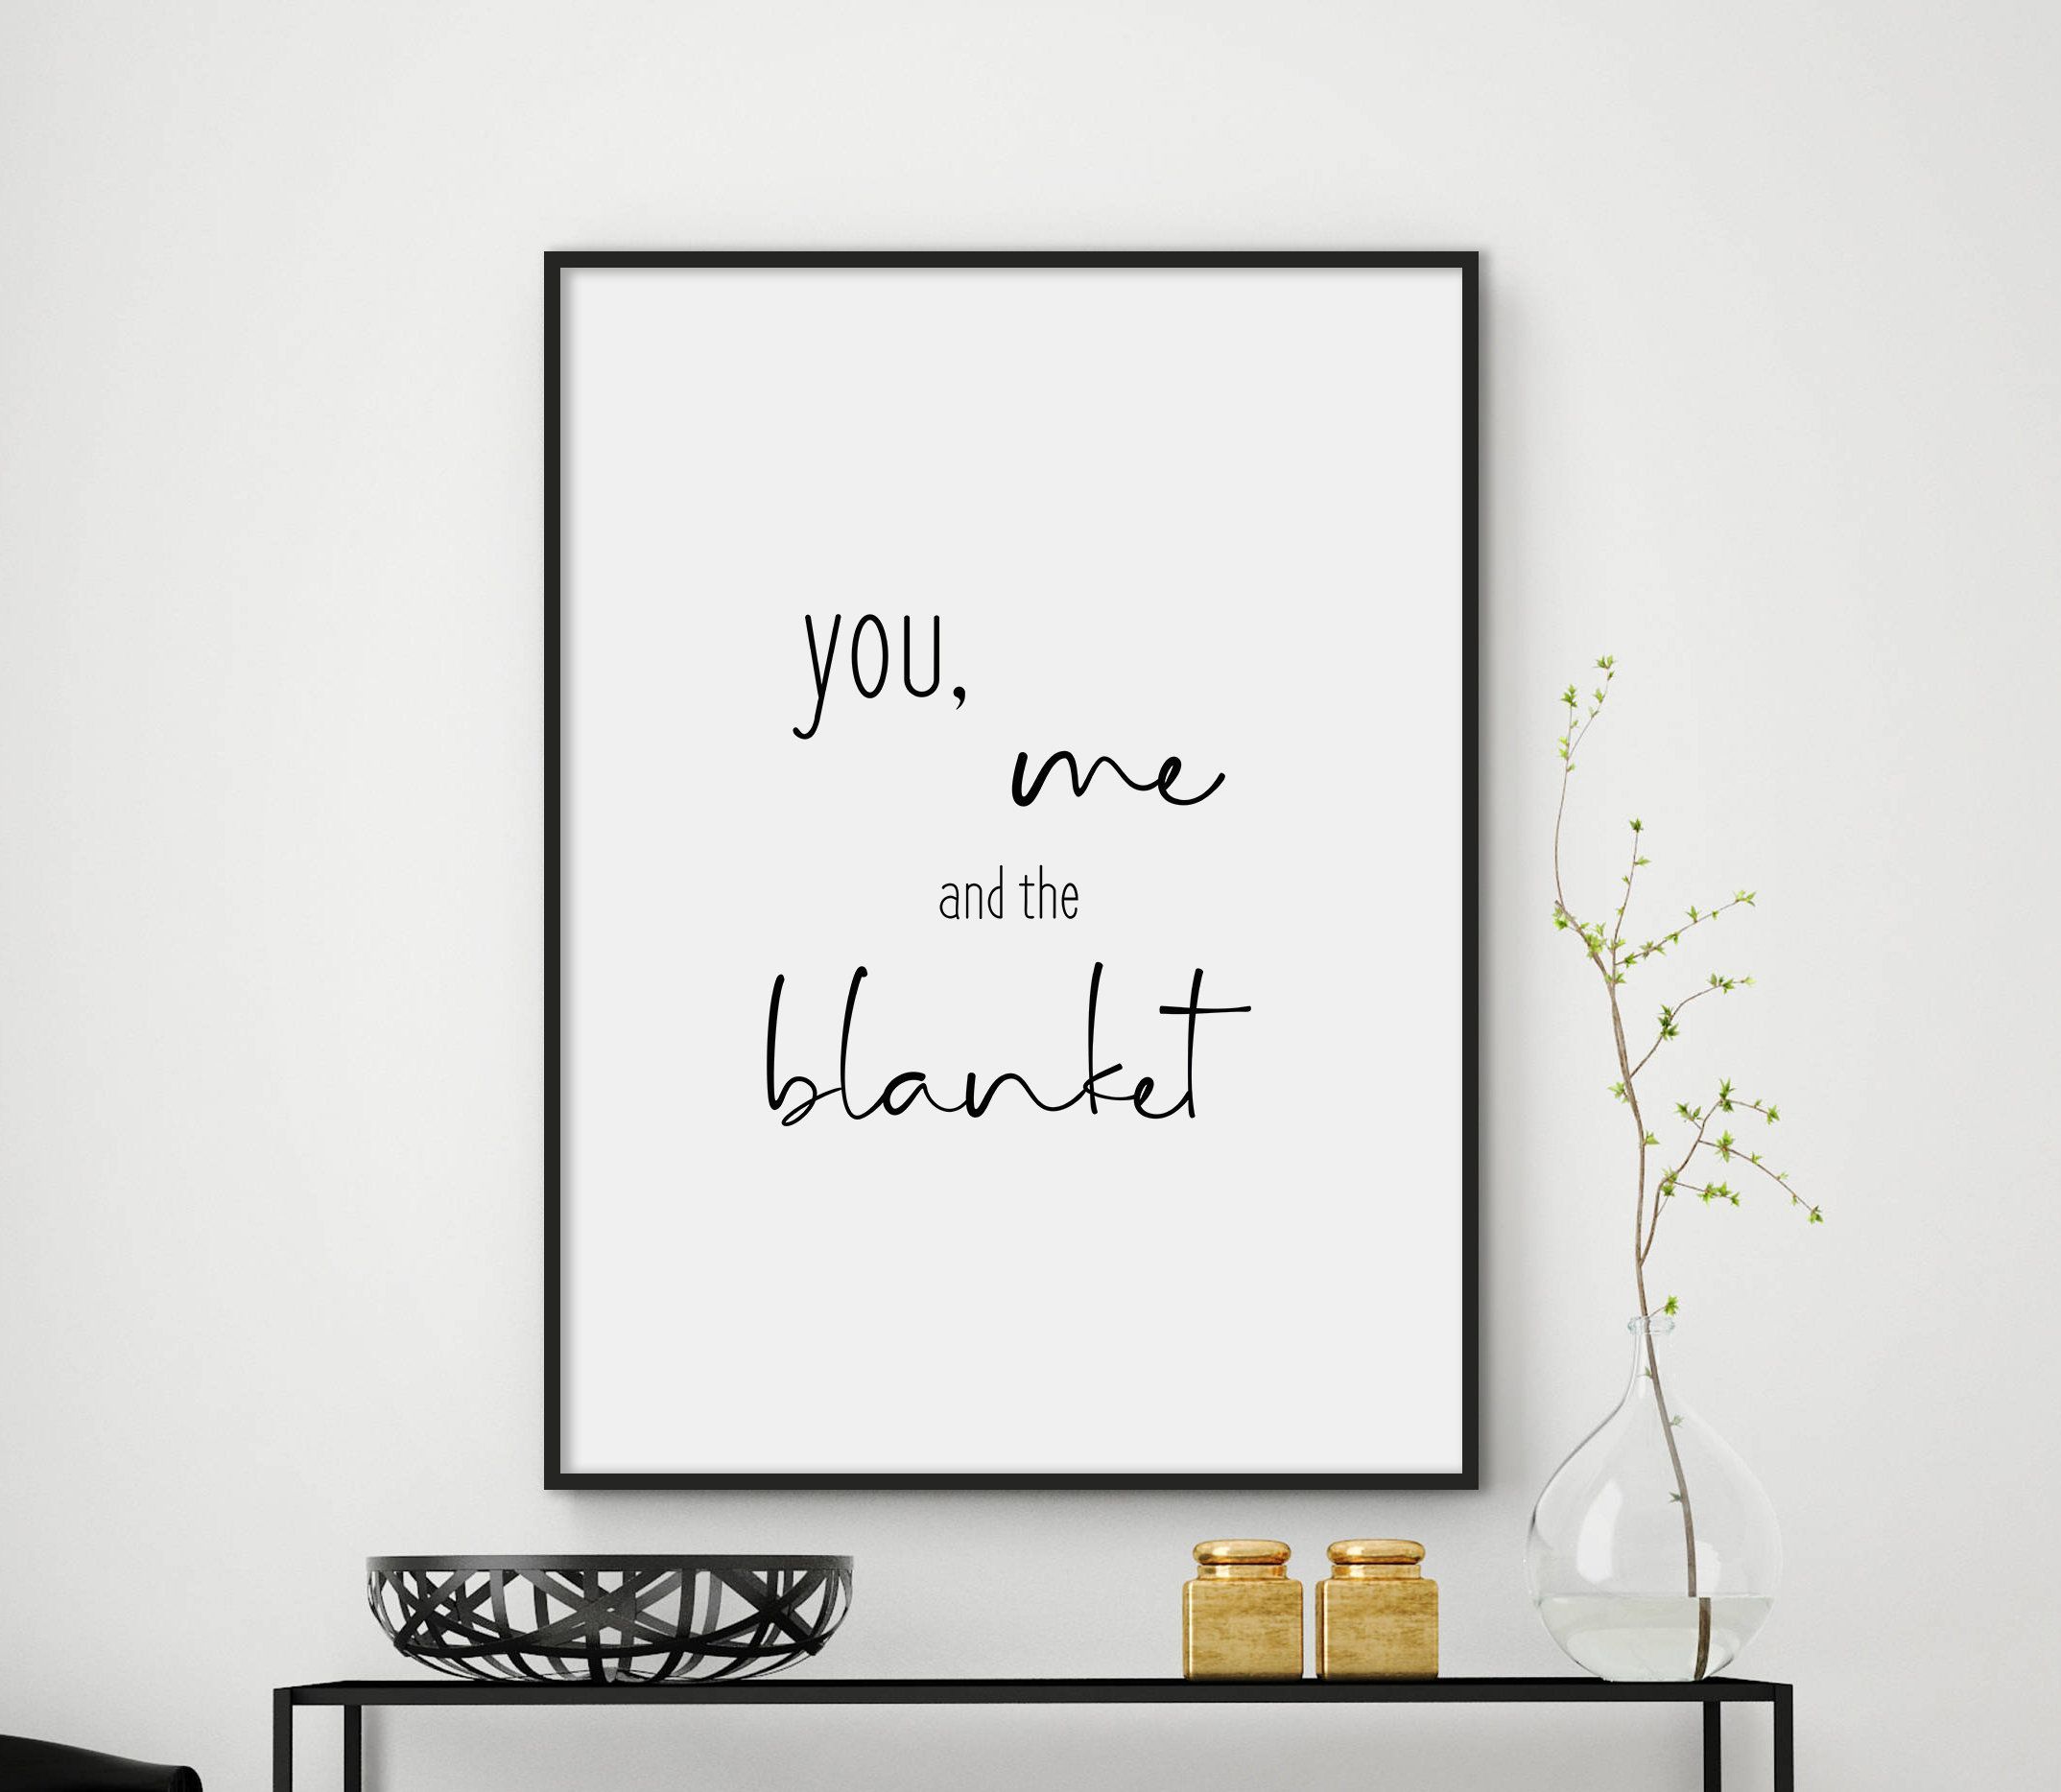 Bedroom Posters Funny Bedroom Wall Decor Funny Quote – Etsy | Funny Wall  Art Quotes, Funny Bedroom, Funny Quote Prints Inside Funny Quote Wall Art (View 7 of 15)